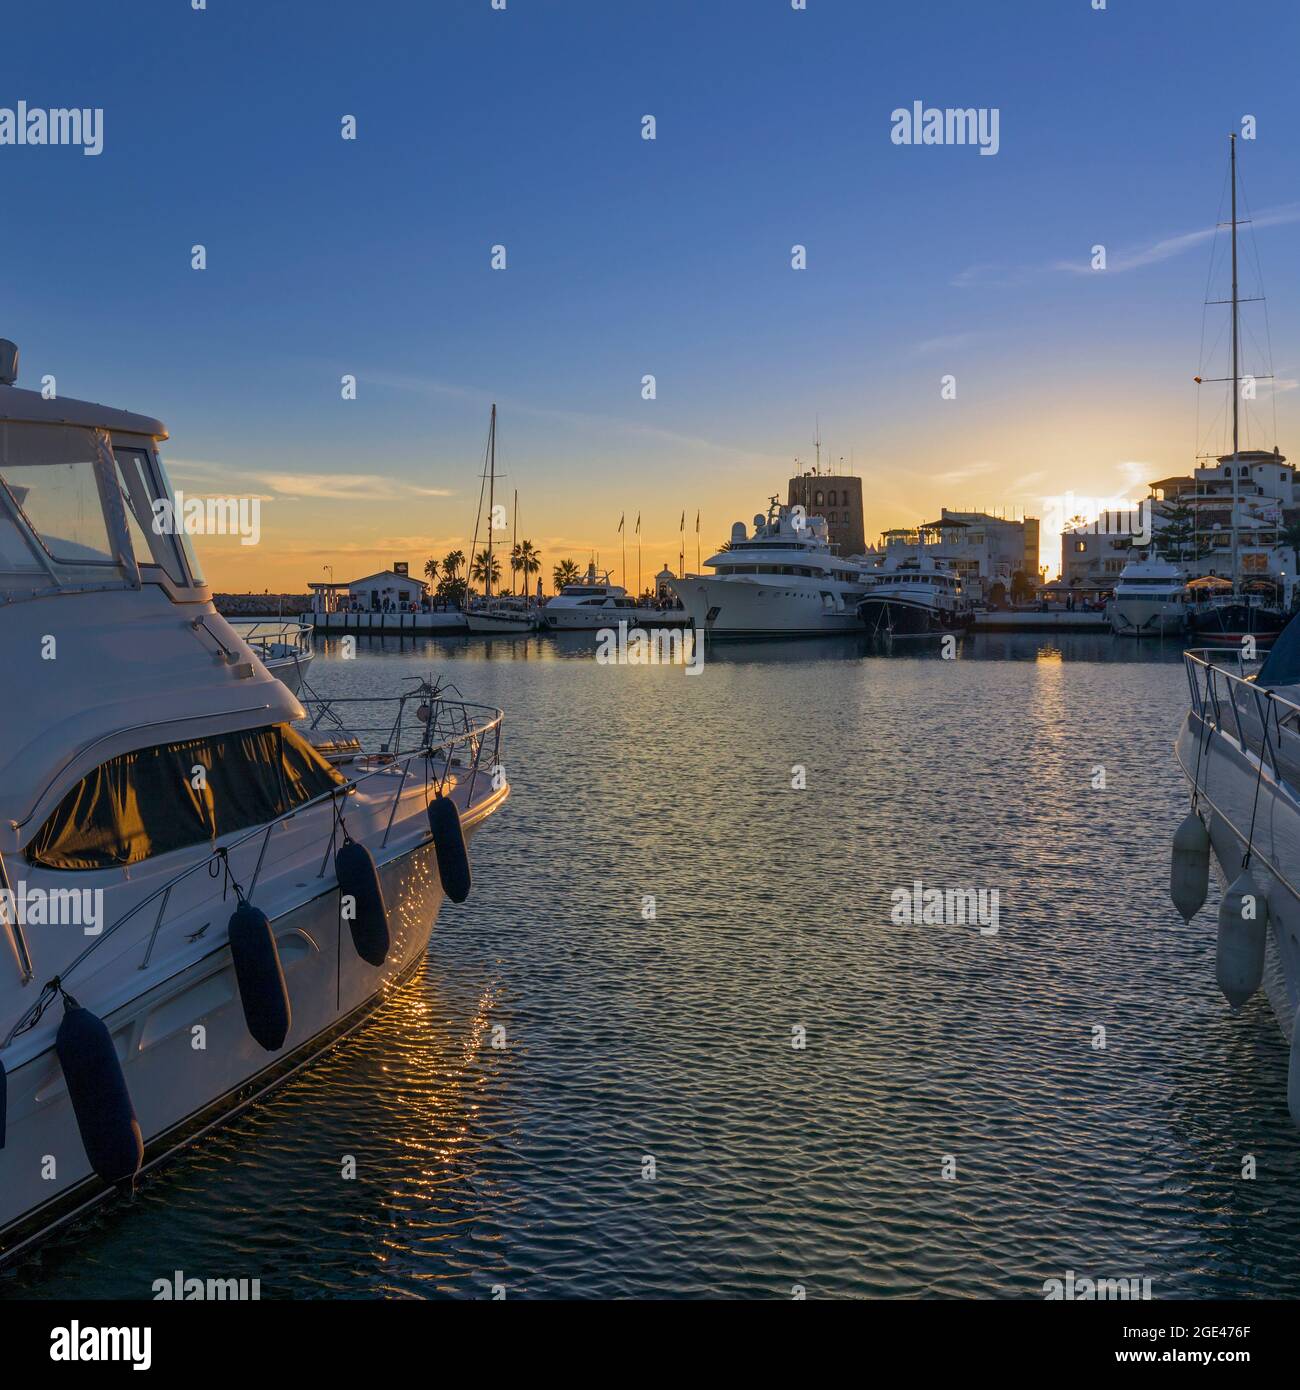 Sunset at Puerto BanÃºs, Andalusia, Spain Editorial Stock Image